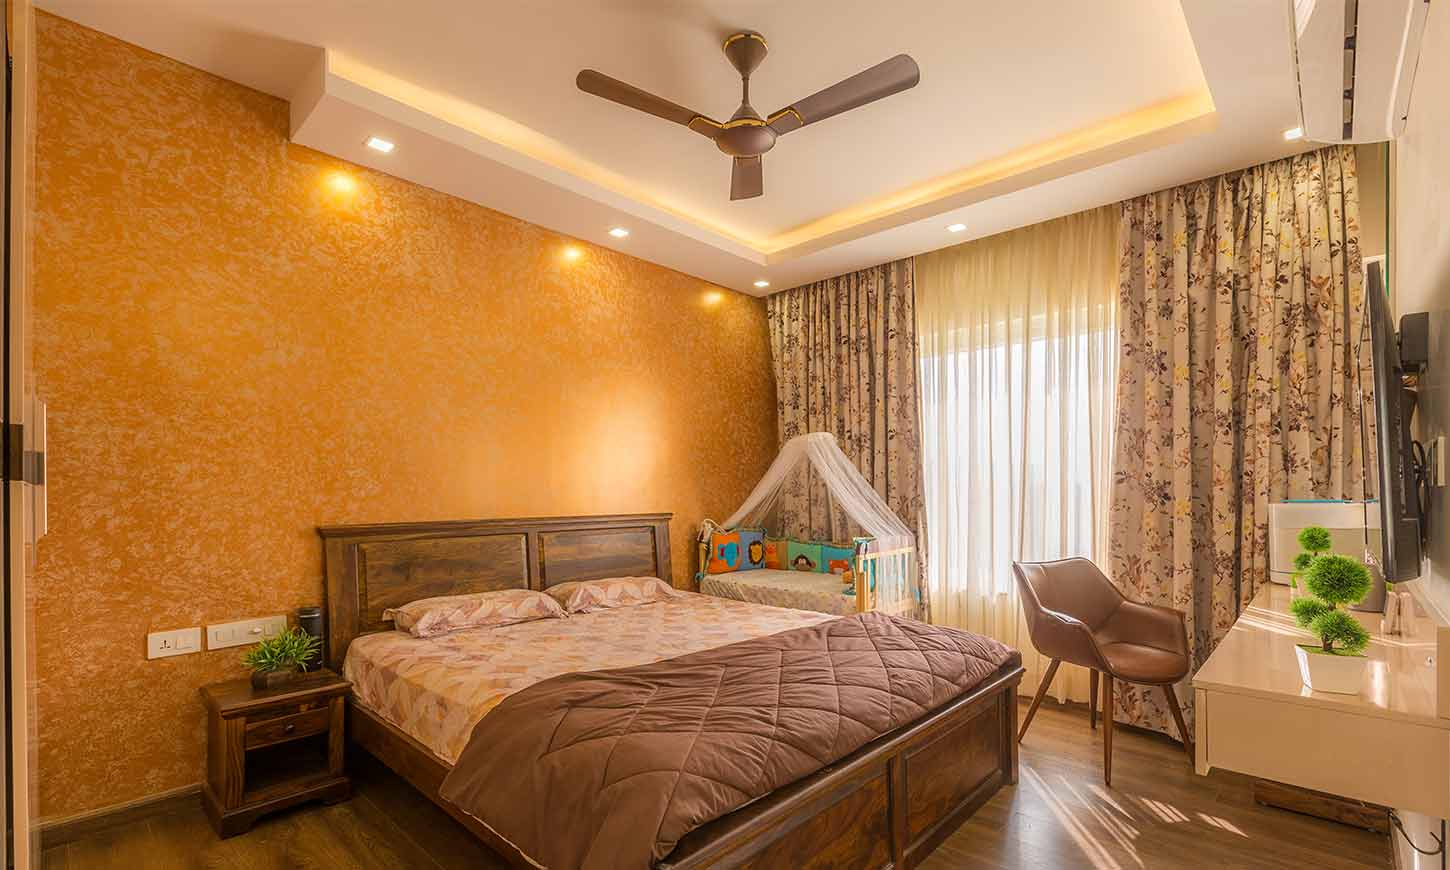 Bedroom interior design bangalore for rohan iksha apartment with a tv unit and a baby cot beside it